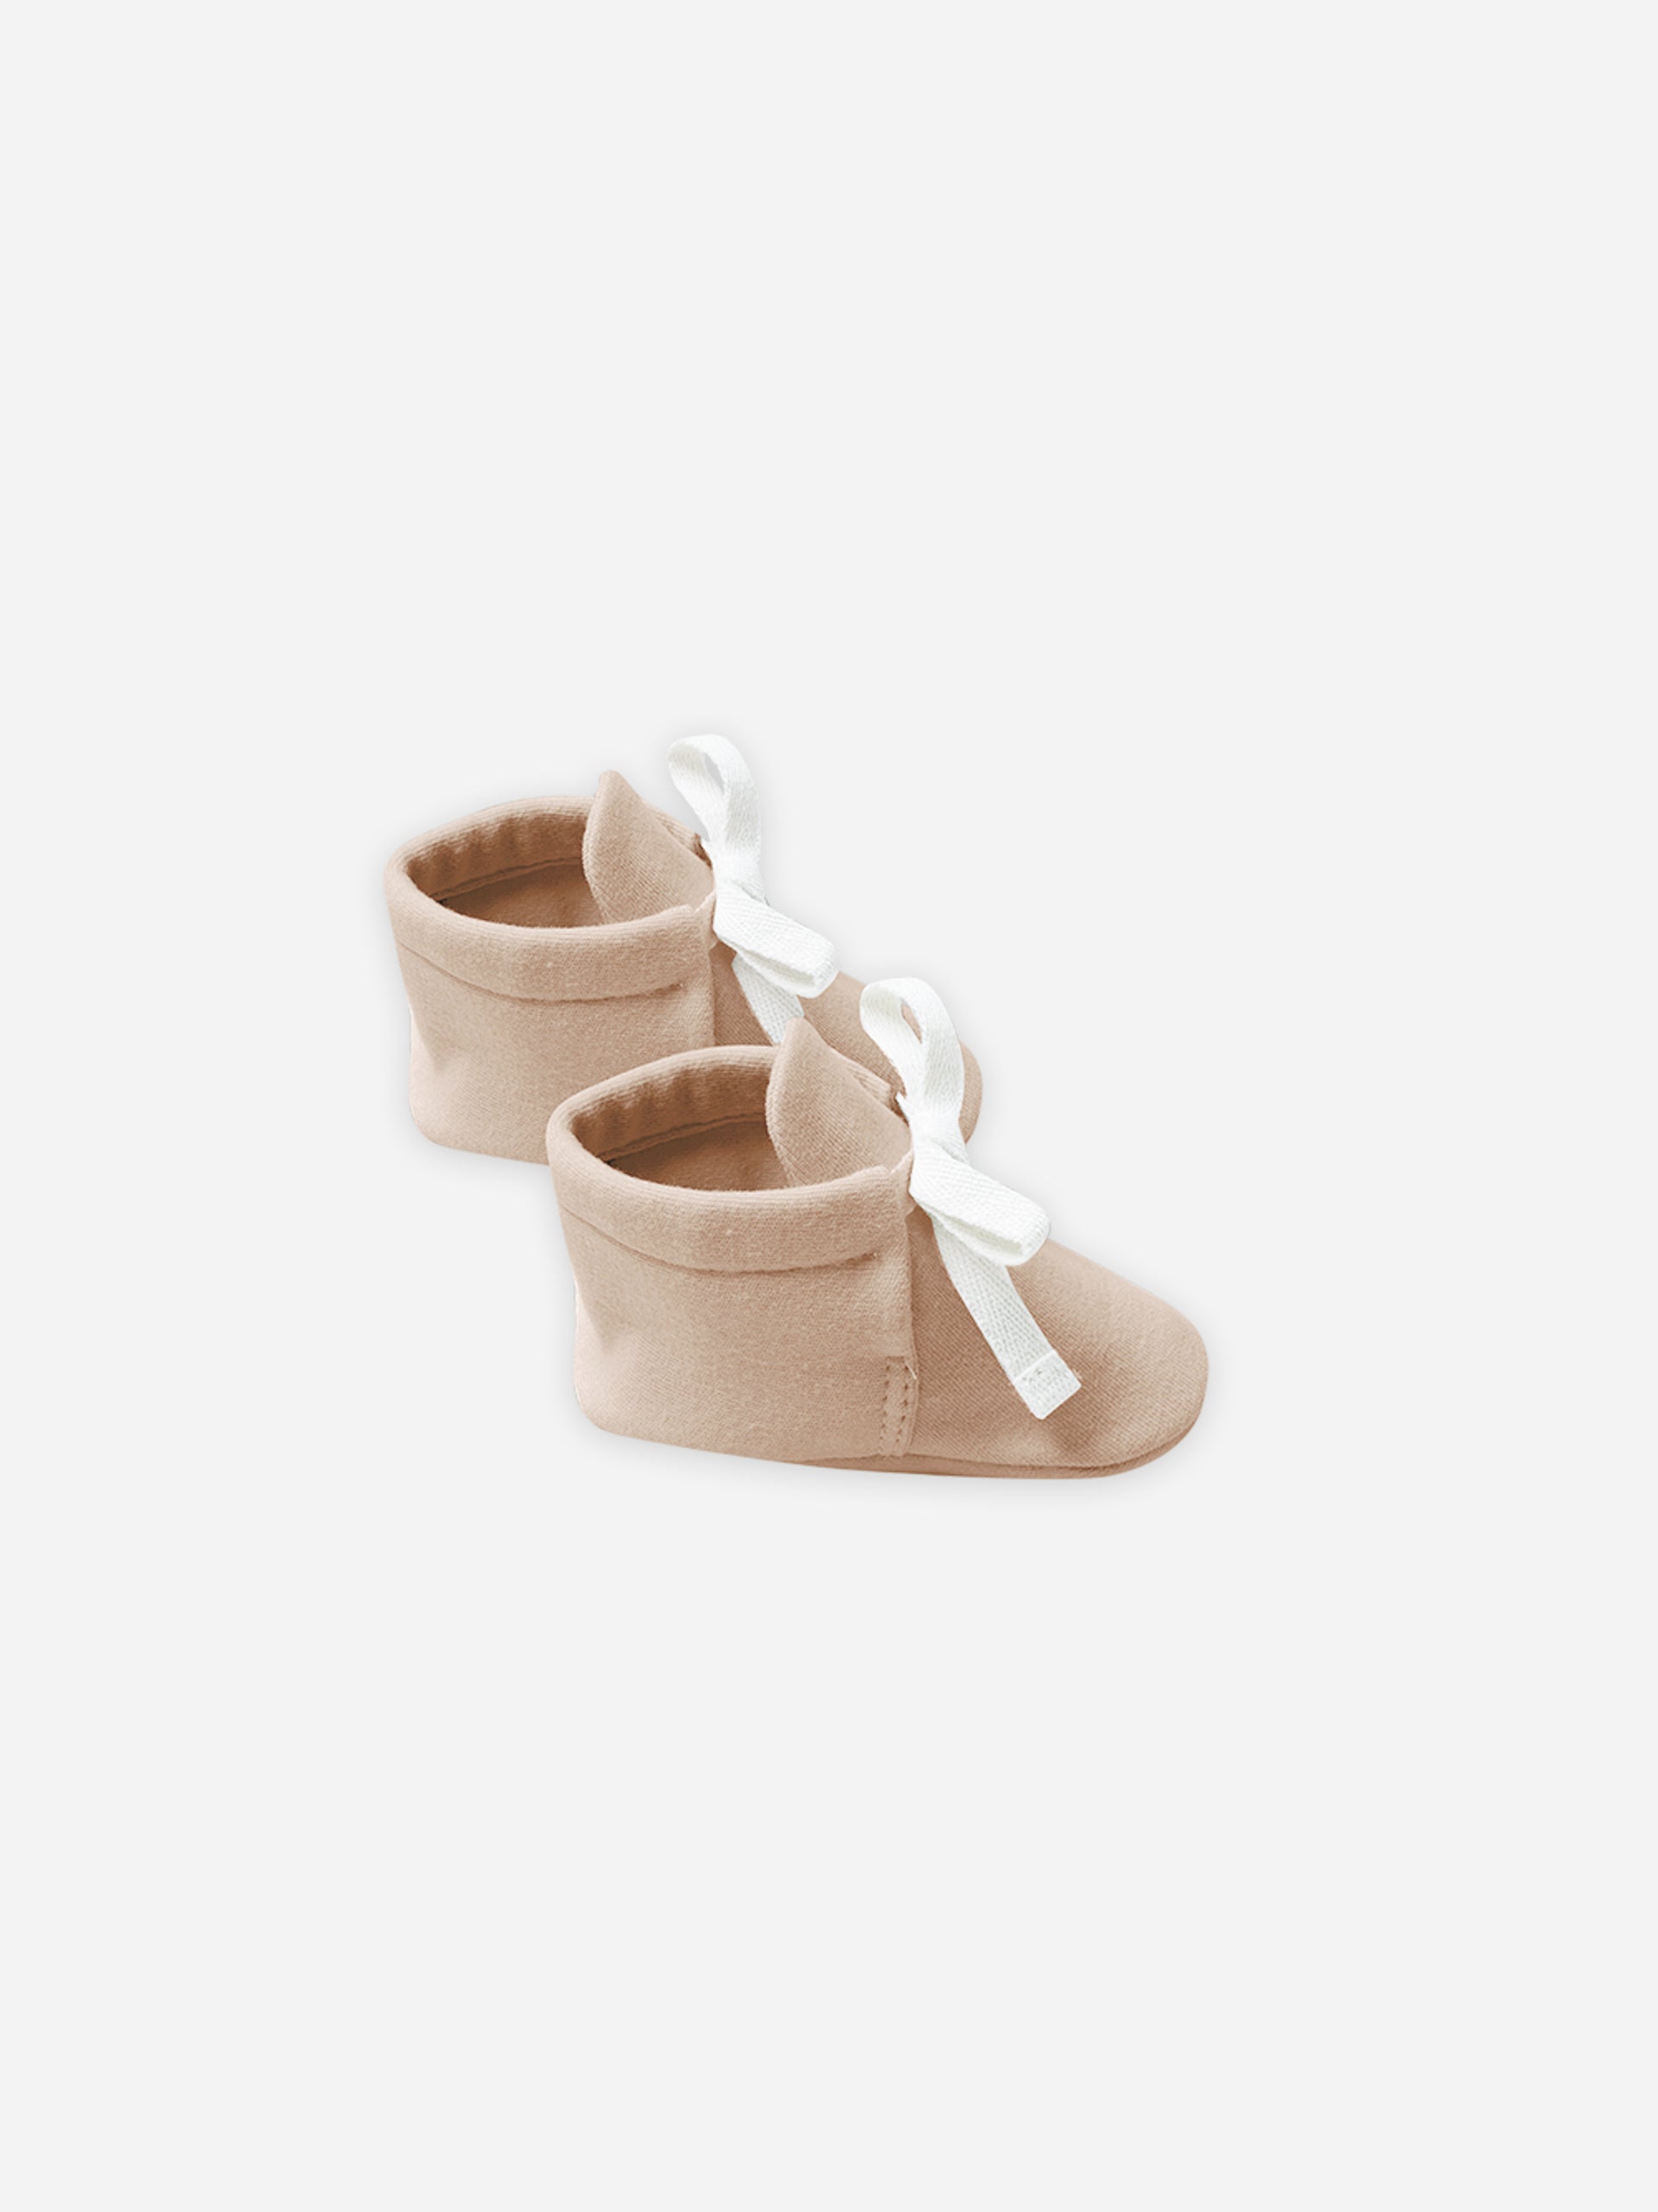 Baby Booties || Shell - Rylee + Cru | Kids Clothes | Trendy Baby Clothes | Modern Infant Outfits |